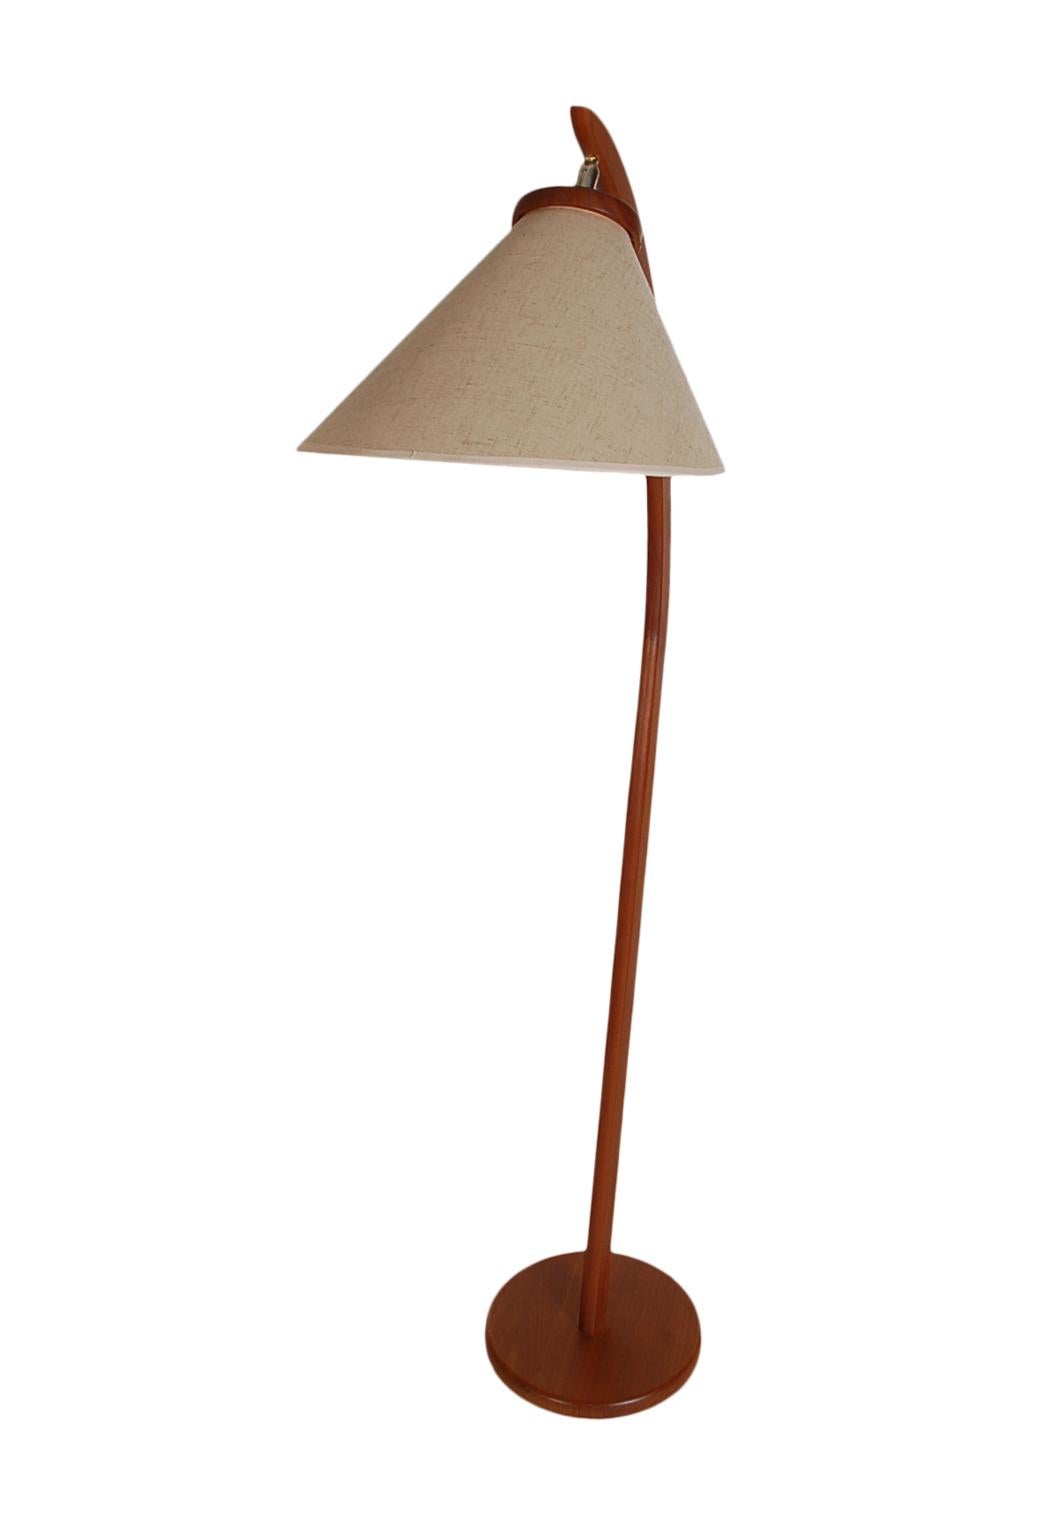 A simple Classic Scandinavian look from the early 1970s. This lamps features all teak construction with the original lamp shade. All in fantastic shape and well cared for through the years.